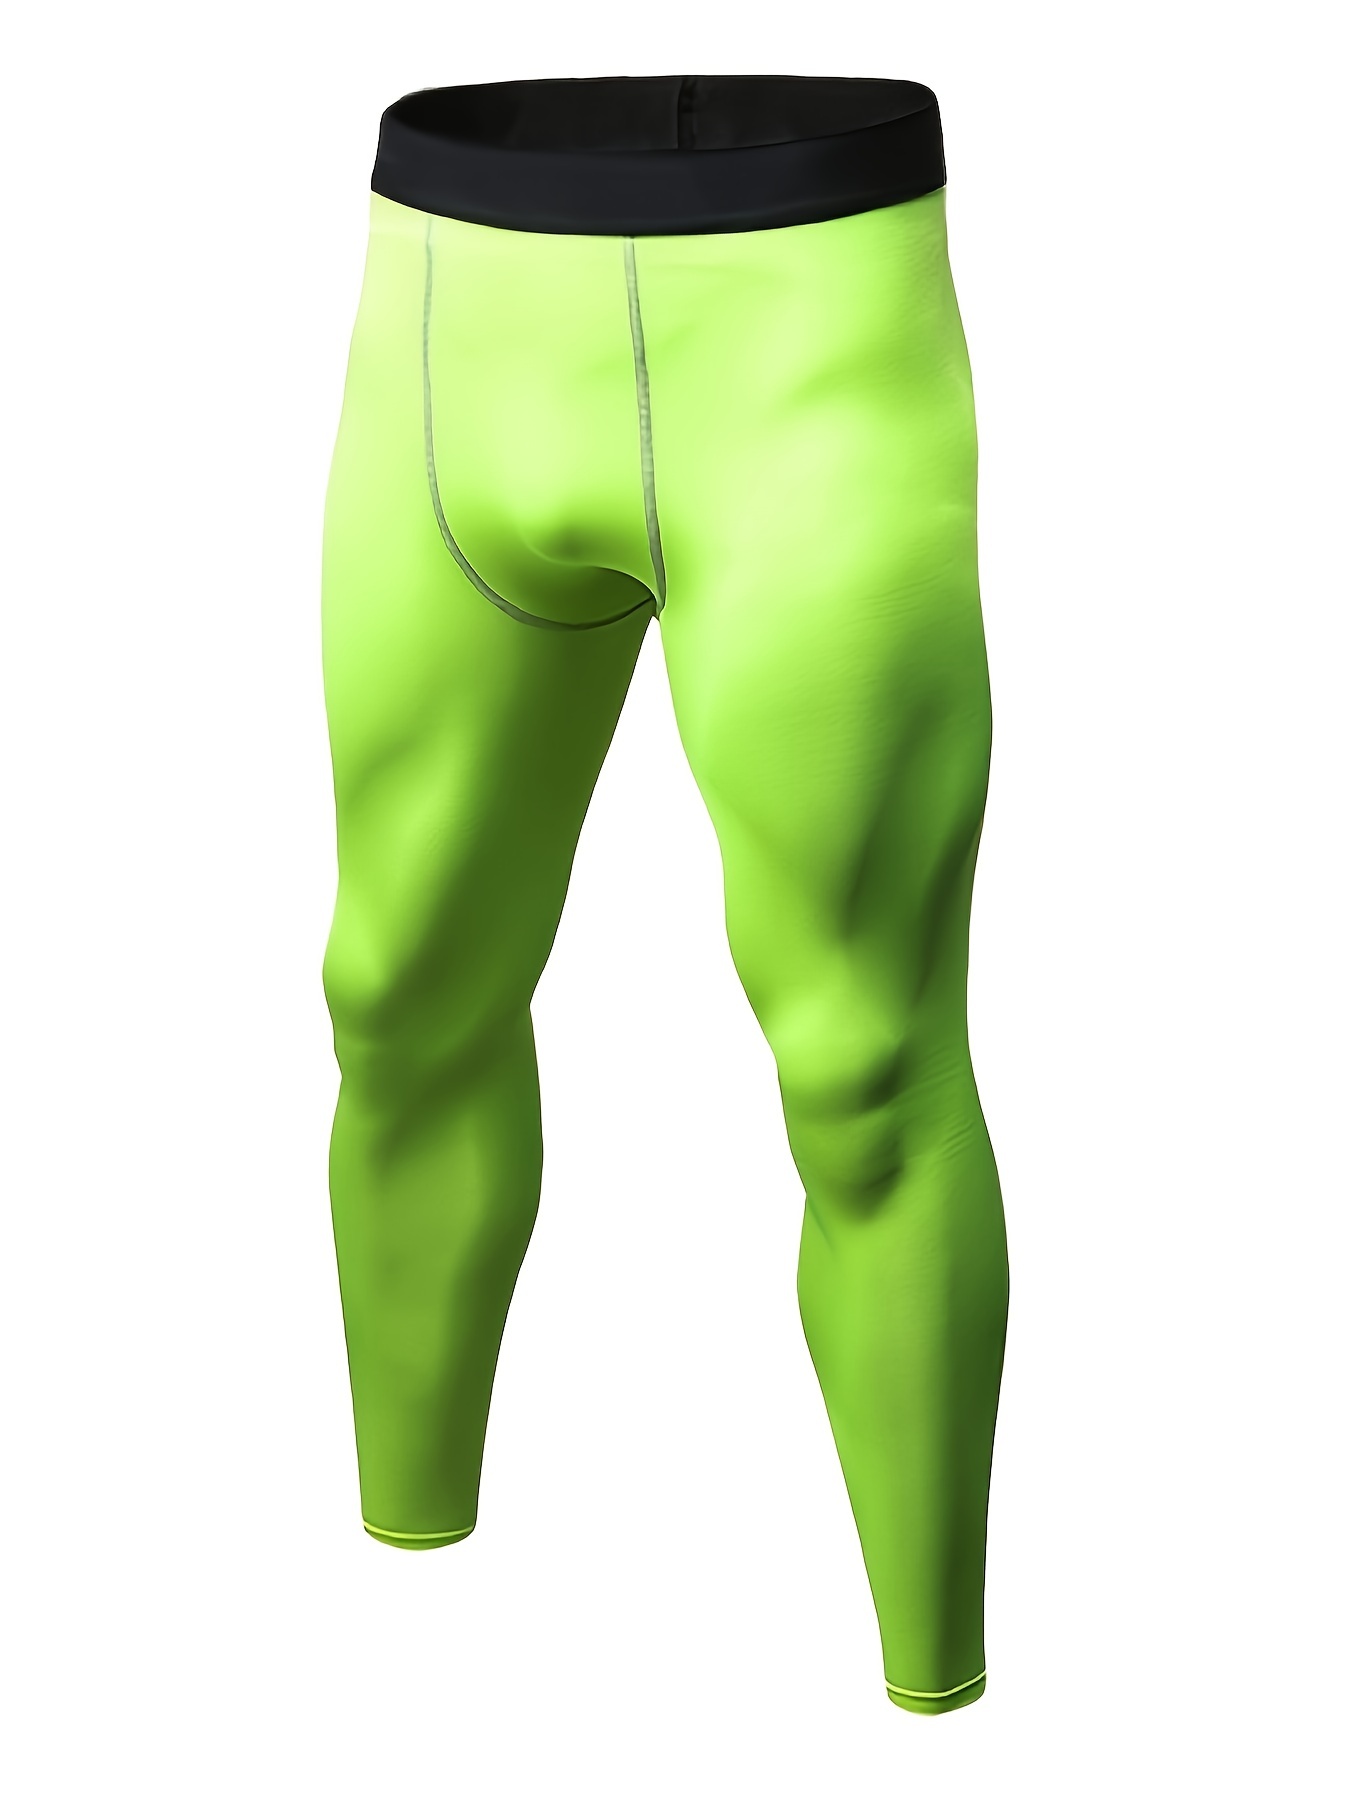 Tuphregyow Men Thermal Compression Pants Solid Trendy Winter-Gear Yoga Pants  Base Layer Bottoms Sports Leggings Athletic Running Tights Green L 